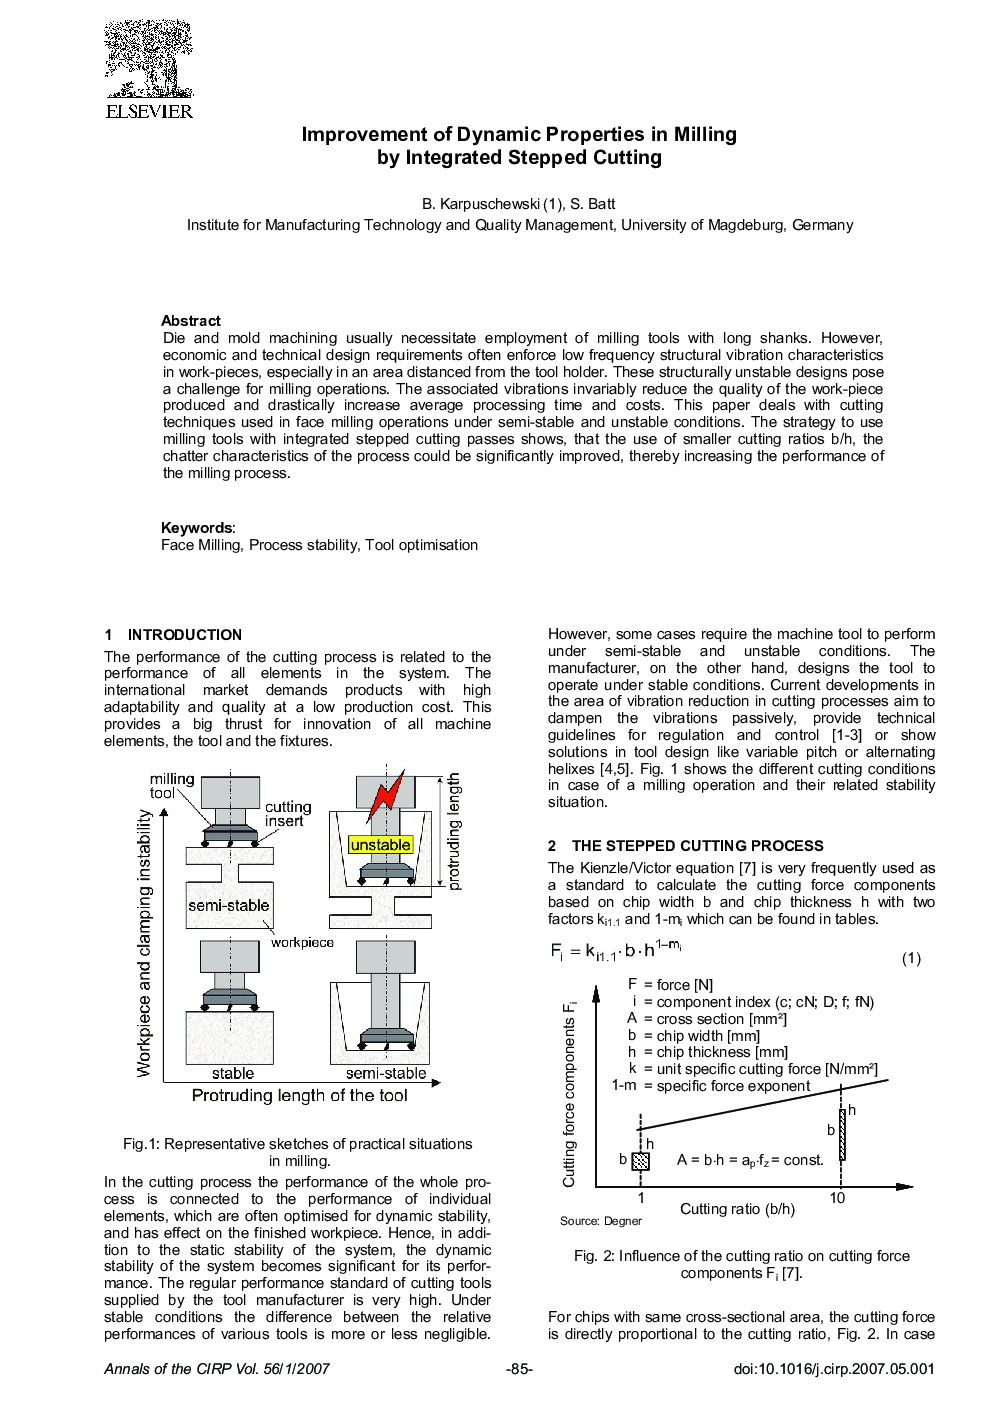 Improvement of Dynamic Properties in Milling by Integrated Stepped Cutting